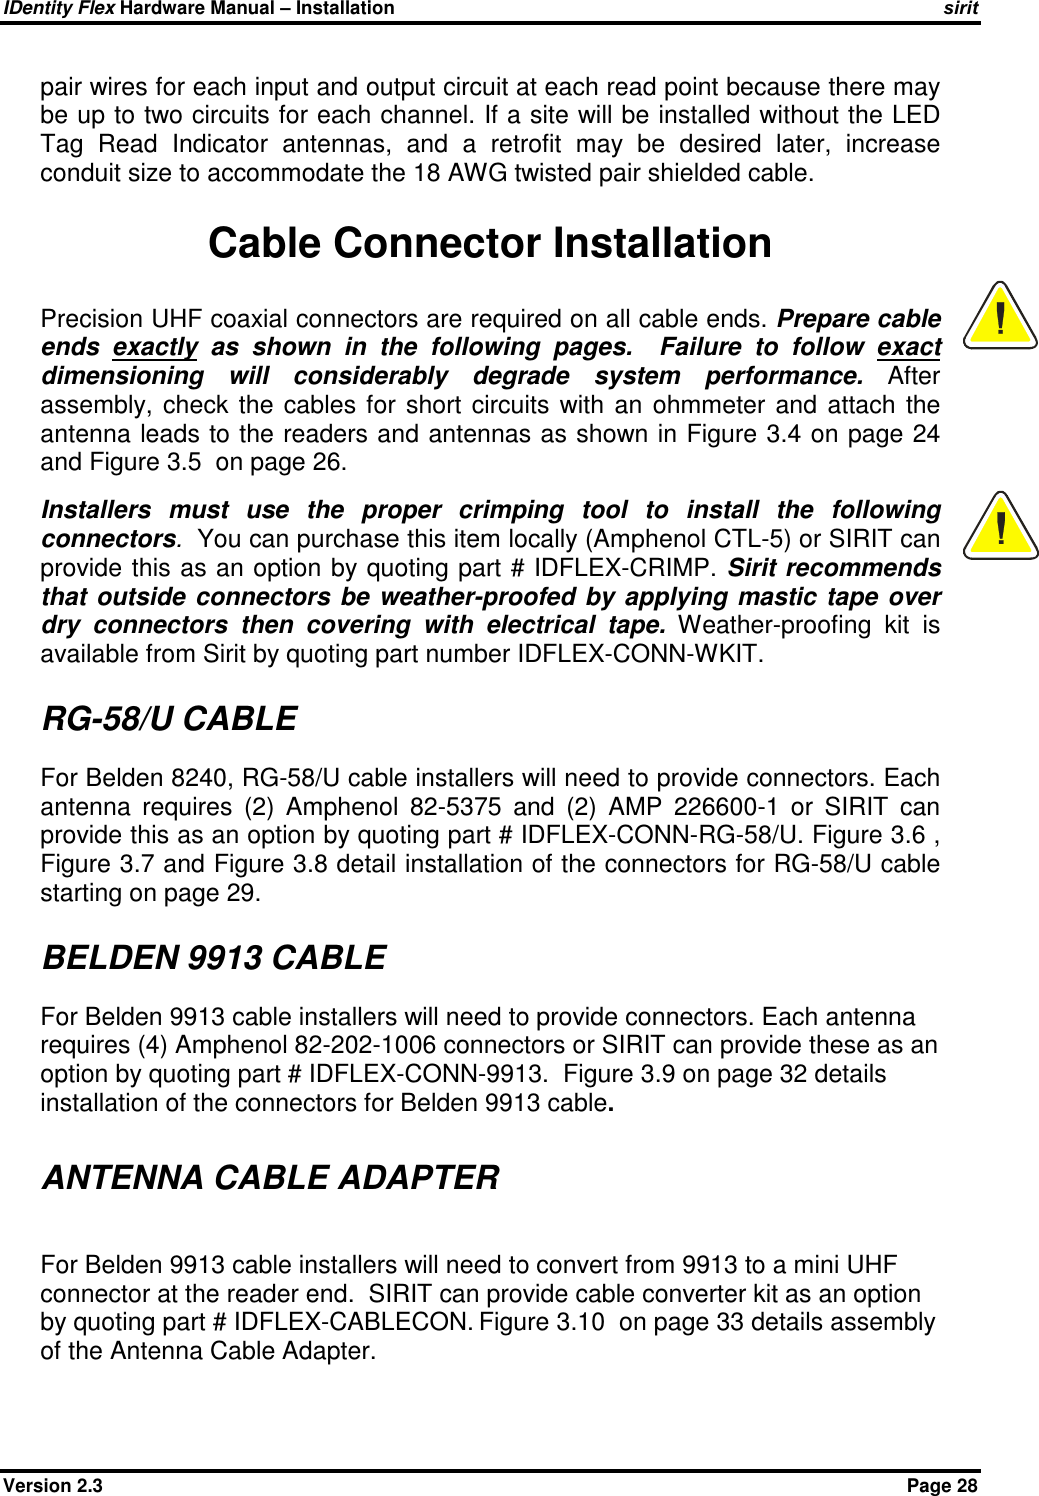 IDentity Flex Hardware Manual – Installation   sirit Version 2.3    Page 28 pair wires for each input and output circuit at each read point because there may be up to two circuits for each channel. If a site will be installed without the LED Tag  Read  Indicator  antennas,  and  a  retrofit  may  be  desired  later,  increase conduit size to accommodate the 18 AWG twisted pair shielded cable.  Cable Connector Installation Precision UHF coaxial connectors are required on all cable ends. Prepare cable ends  exactly  as  shown  in  the  following  pages.    Failure  to  follow  exact dimensioning  will  considerably  degrade  system  performance.  After assembly,  check  the  cables  for  short  circuits  with  an  ohmmeter  and  attach  the antenna leads to the readers and antennas as shown in Figure 3.4 on page 24 and Figure 3.5  on page 26.   Installers  must  use  the  proper  crimping  tool  to  install  the  following connectors.  You can purchase this item locally (Amphenol CTL-5) or SIRIT can provide this as an option by quoting part # IDFLEX-CRIMP. Sirit recommends that  outside  connectors  be weather-proofed  by  applying  mastic tape  over dry  connectors  then  covering  with  electrical  tape.  Weather-proofing  kit  is available from Sirit by quoting part number IDFLEX-CONN-WKIT.  RG-58/U CABLE For Belden 8240, RG-58/U cable installers will need to provide connectors. Each antenna  requires  (2)  Amphenol  82-5375  and  (2)  AMP  226600-1  or  SIRIT  can provide this as an option by quoting part # IDFLEX-CONN-RG-58/U. Figure 3.6 , Figure 3.7 and Figure 3.8 detail installation of the connectors for RG-58/U cable starting on page 29.  BELDEN 9913 CABLE For Belden 9913 cable installers will need to provide connectors. Each antenna requires (4) Amphenol 82-202-1006 connectors or SIRIT can provide these as an option by quoting part # IDFLEX-CONN-9913.  Figure 3.9 on page 32 details installation of the connectors for Belden 9913 cable.  ANTENNA CABLE ADAPTER  For Belden 9913 cable installers will need to convert from 9913 to a mini UHF connector at the reader end.  SIRIT can provide cable converter kit as an option by quoting part # IDFLEX-CABLECON. Figure 3.10  on page 33 details assembly of the Antenna Cable Adapter.   